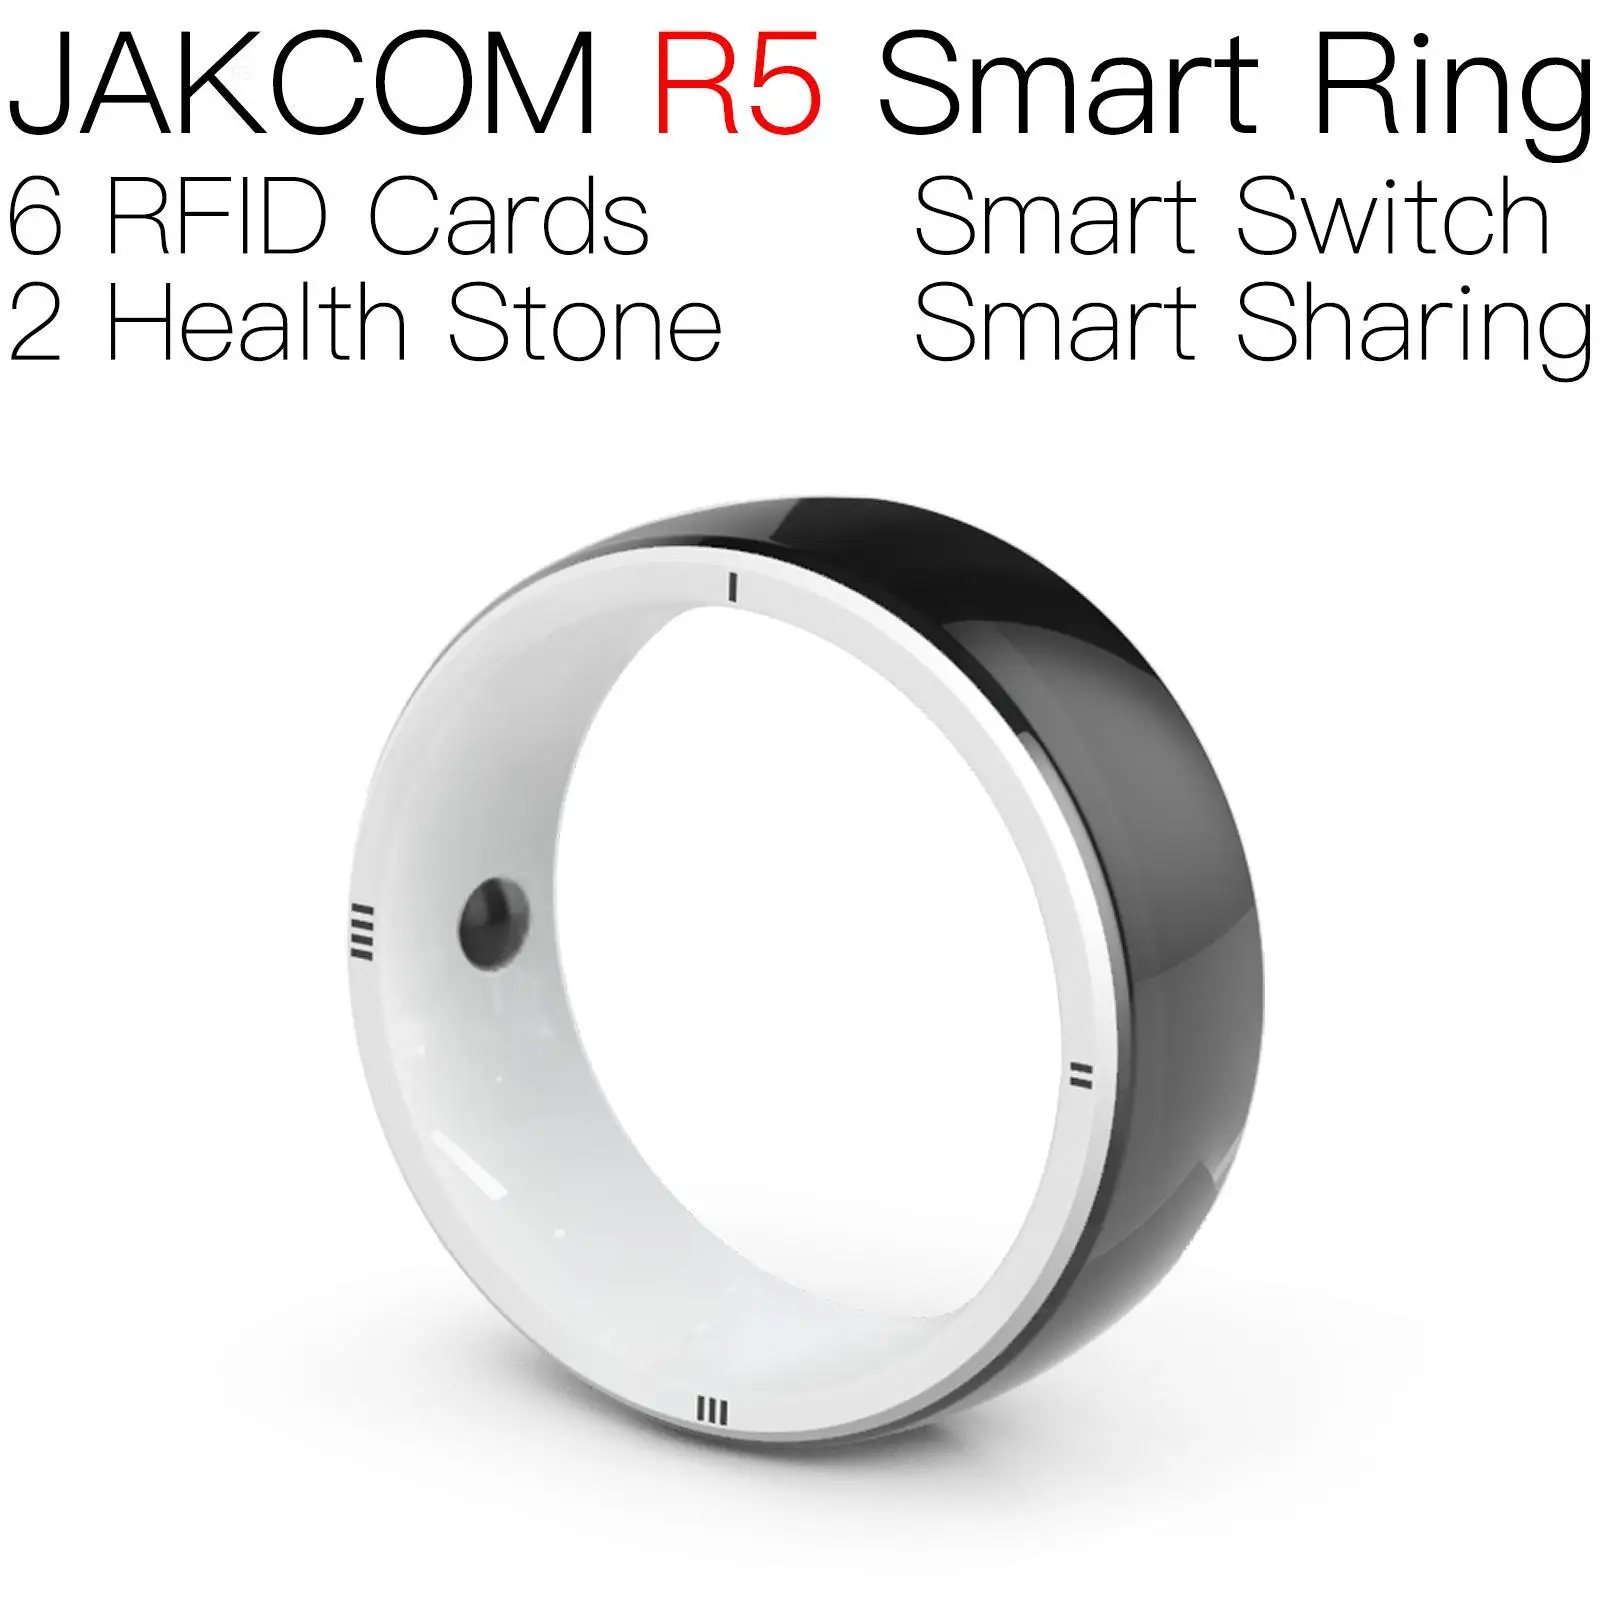 JAKCOM R5 Smart Ring Super value than record rfid tag hacker paypal accepted pl259 uhf windshield palomas gps alien in jar